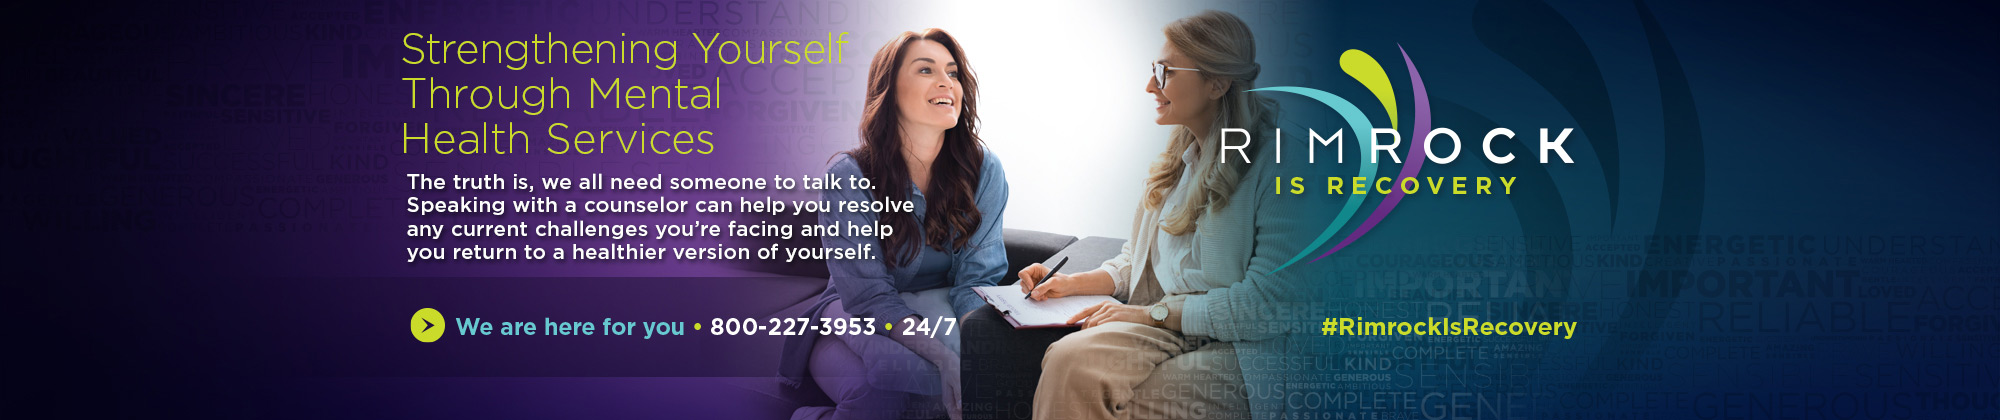 Rimrock - Rimrock is Recovery - Strengthening Yourself Through Mental Health Services